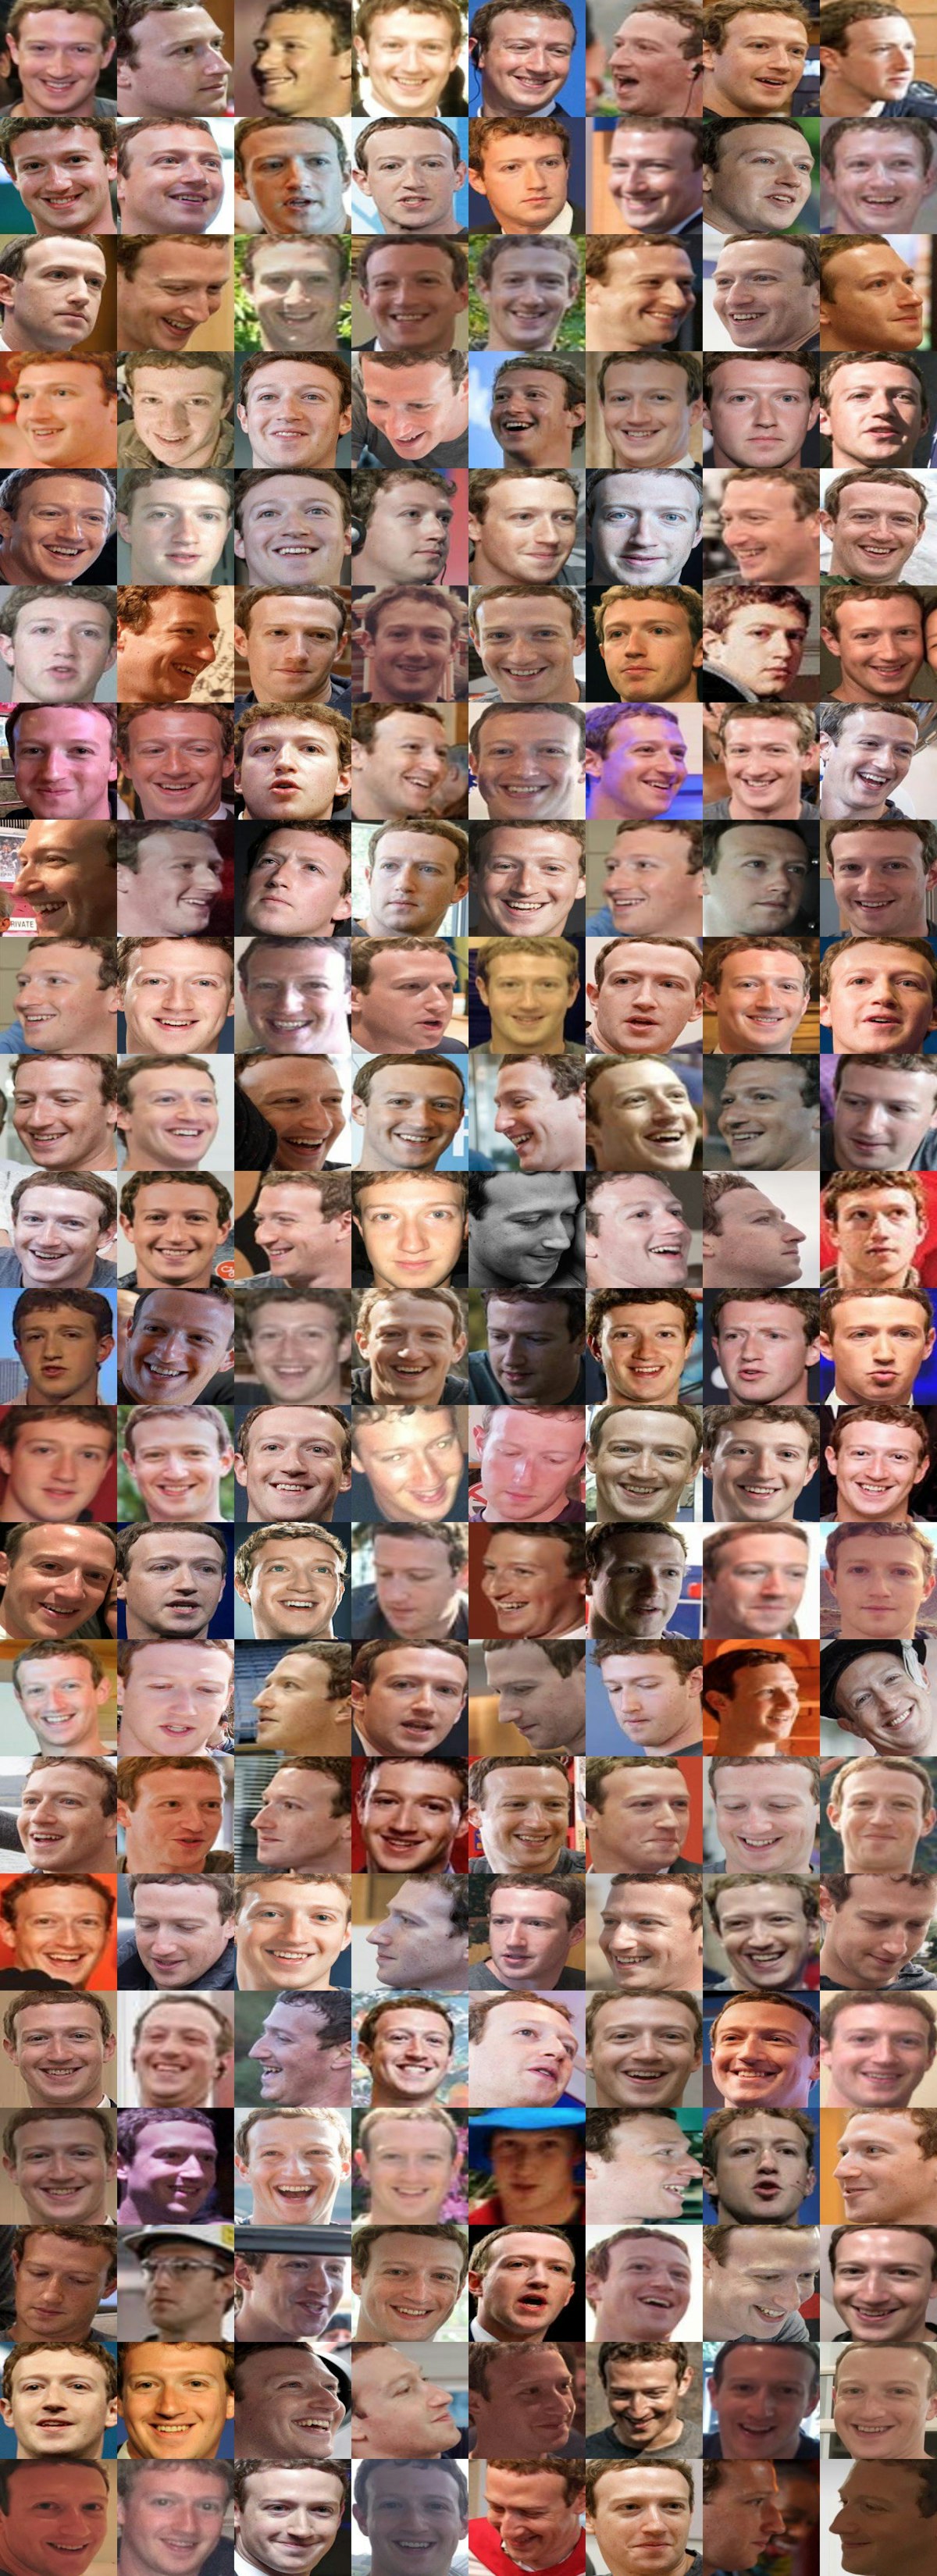 featured image - The Many Faces of Mark Zuckerberg: A Deep Learning Approach (part 1)